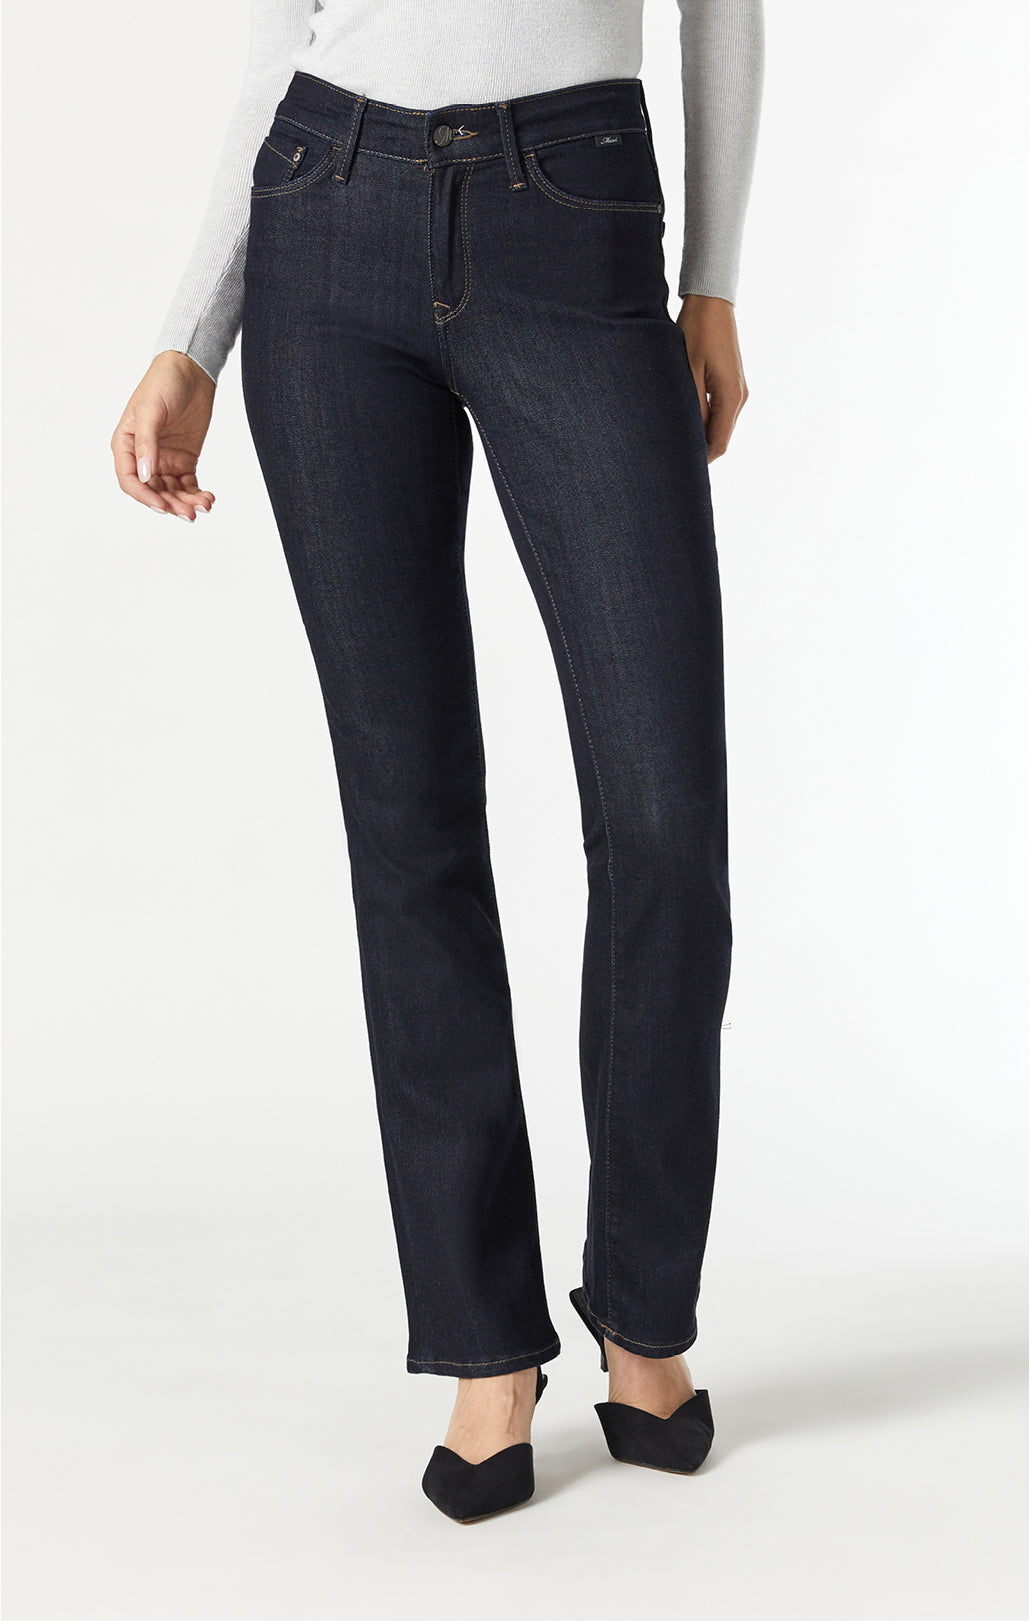 Shop All Jeans for Women, Womens Jeans